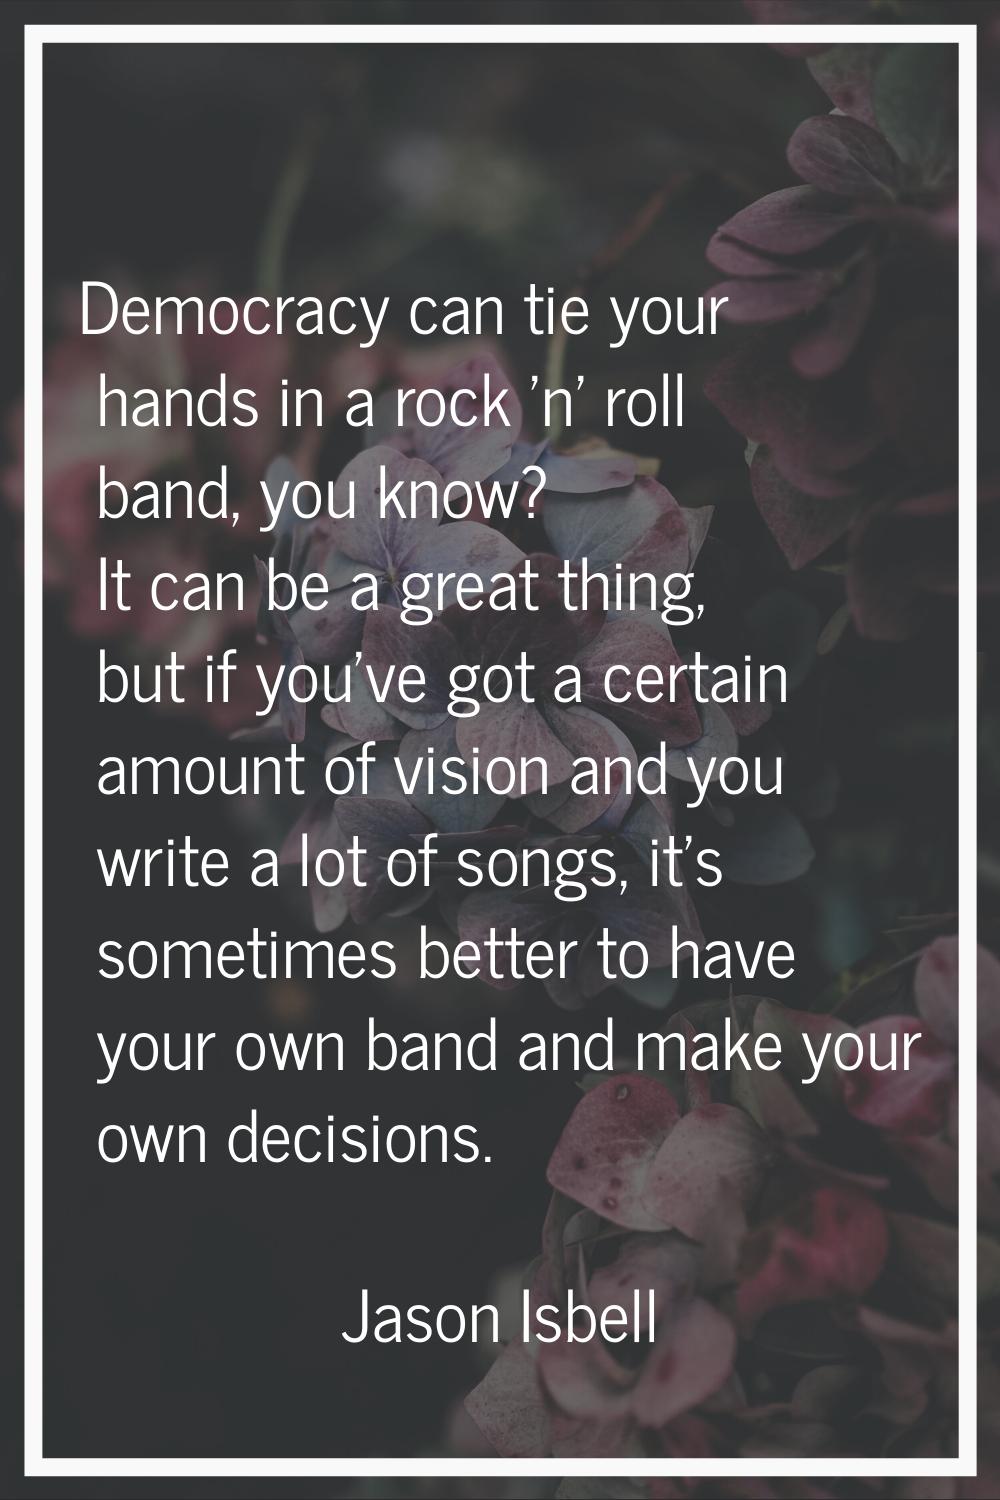 Democracy can tie your hands in a rock 'n' roll band, you know? It can be a great thing, but if you